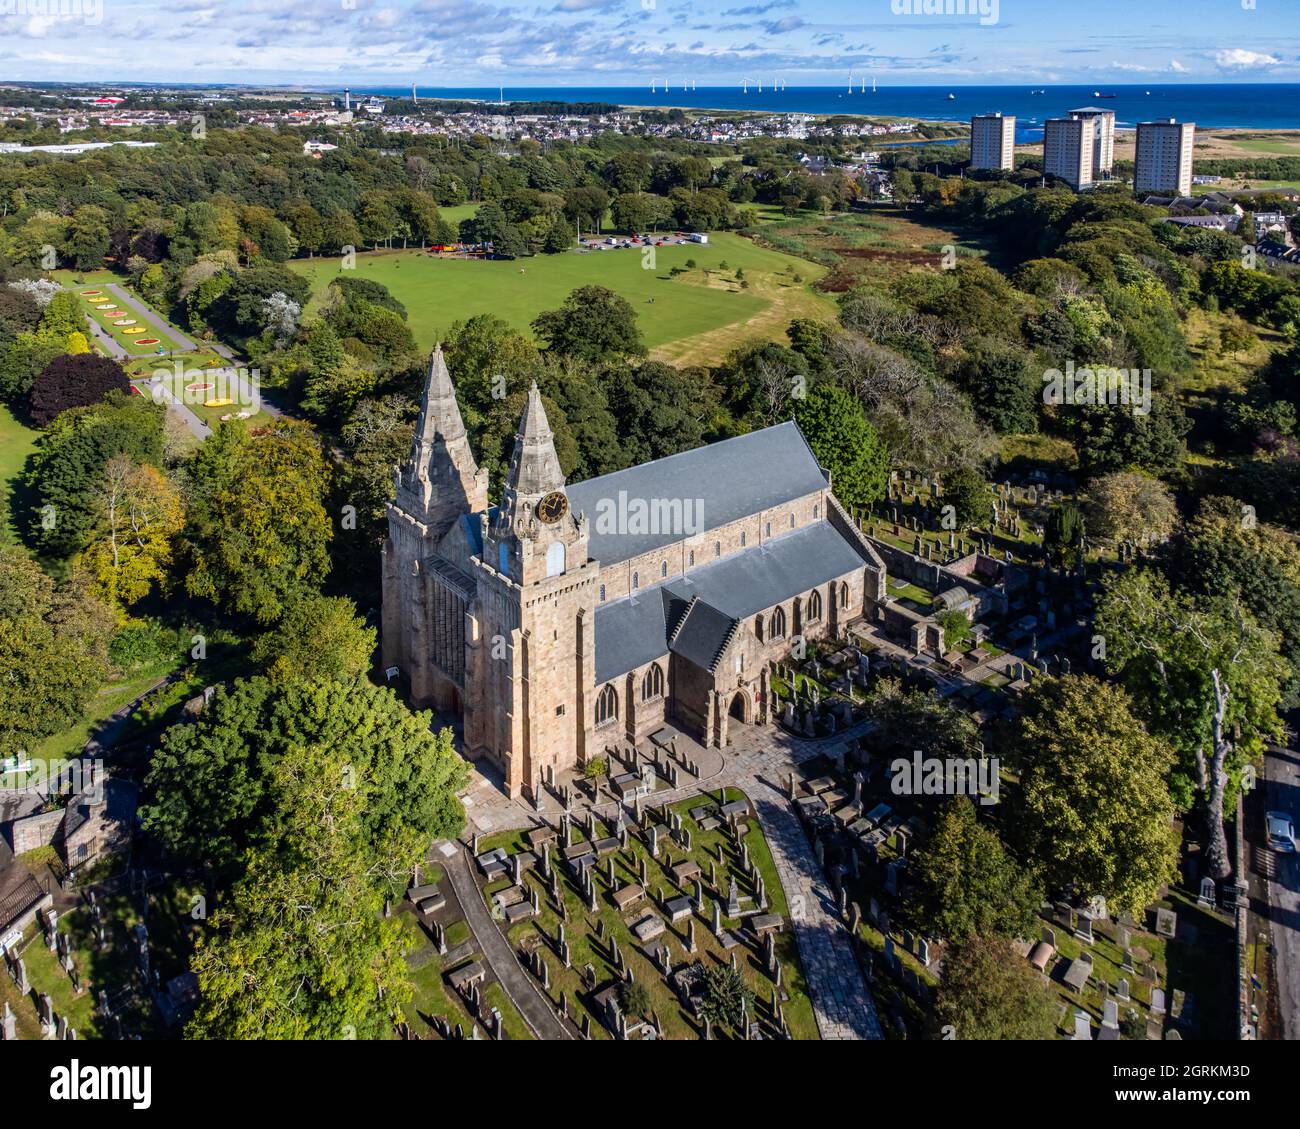 Aerial view of St Machar (or St Machar's) Cathedral in the city of Aberdeen, Scotland, with Seaton park and Seaton flats visible in the background Stock Photo